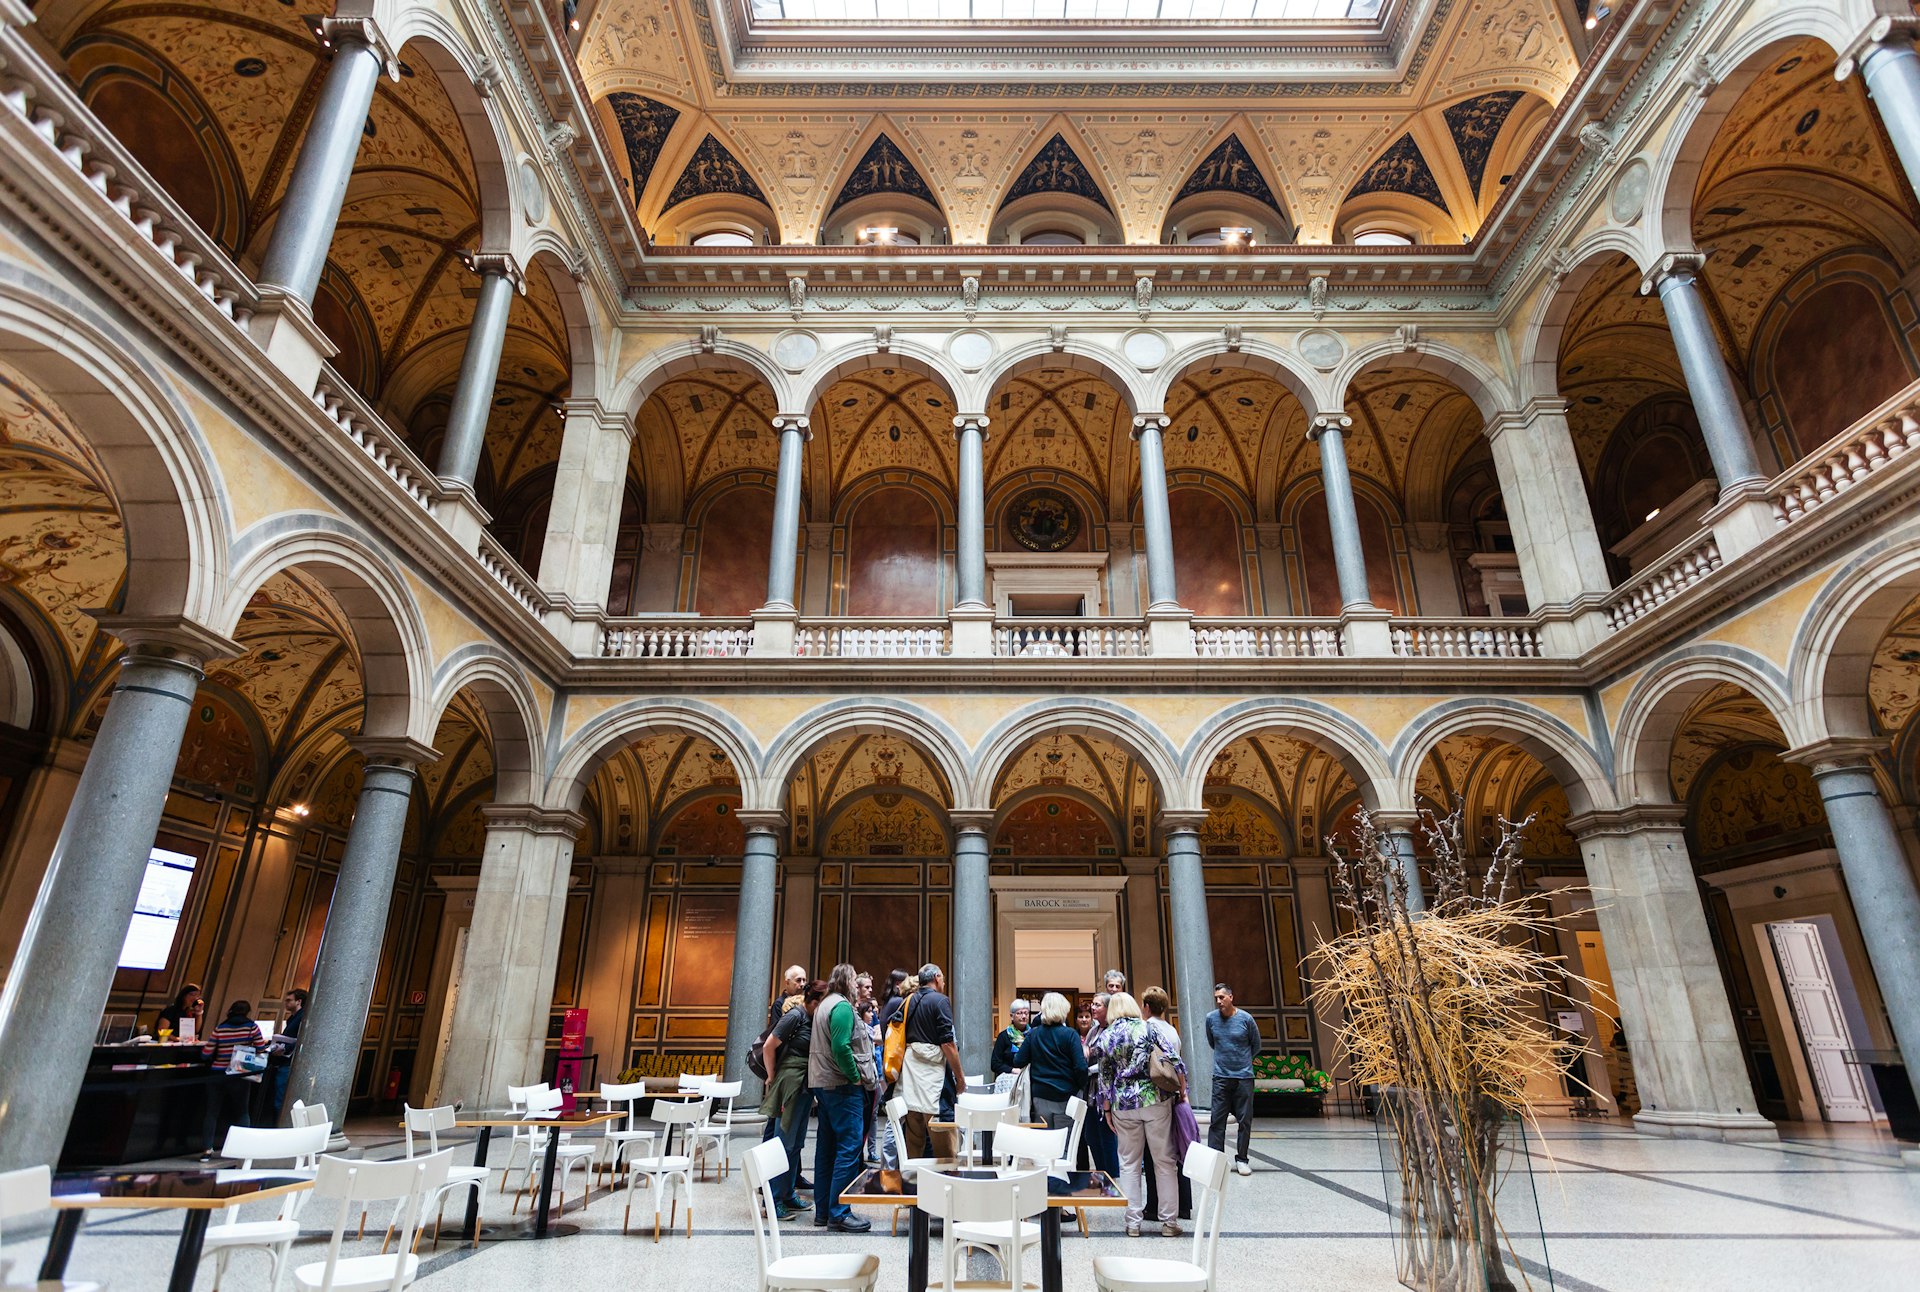 Visitors in the courtyard of MAK, a museum in Vienna